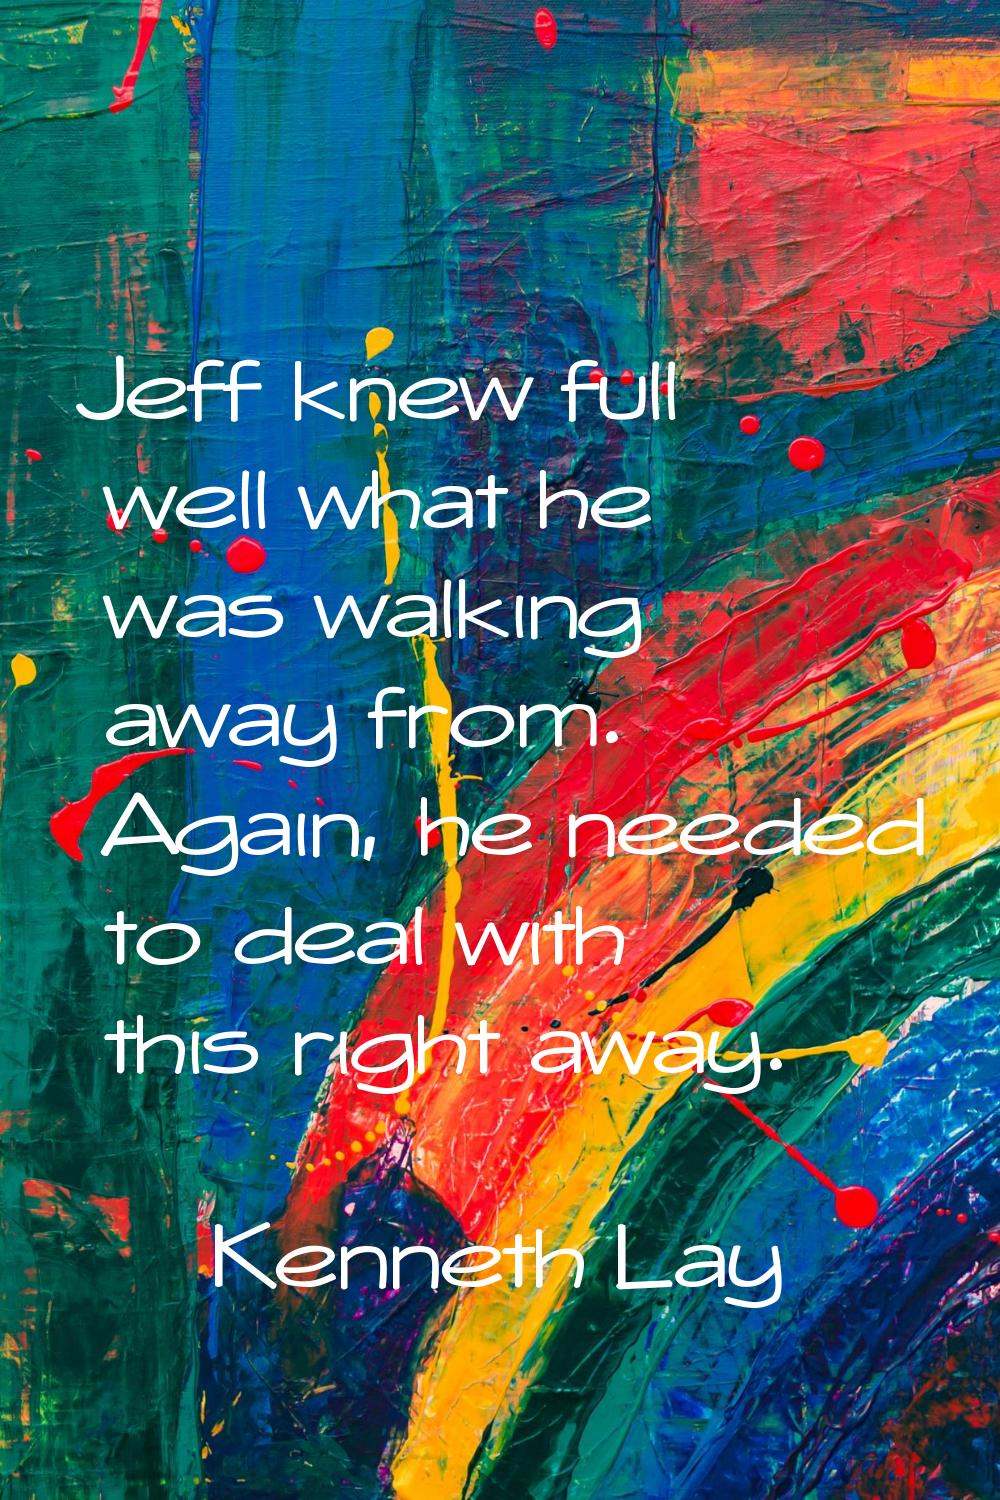 Jeff knew full well what he was walking away from. Again, he needed to deal with this right away.